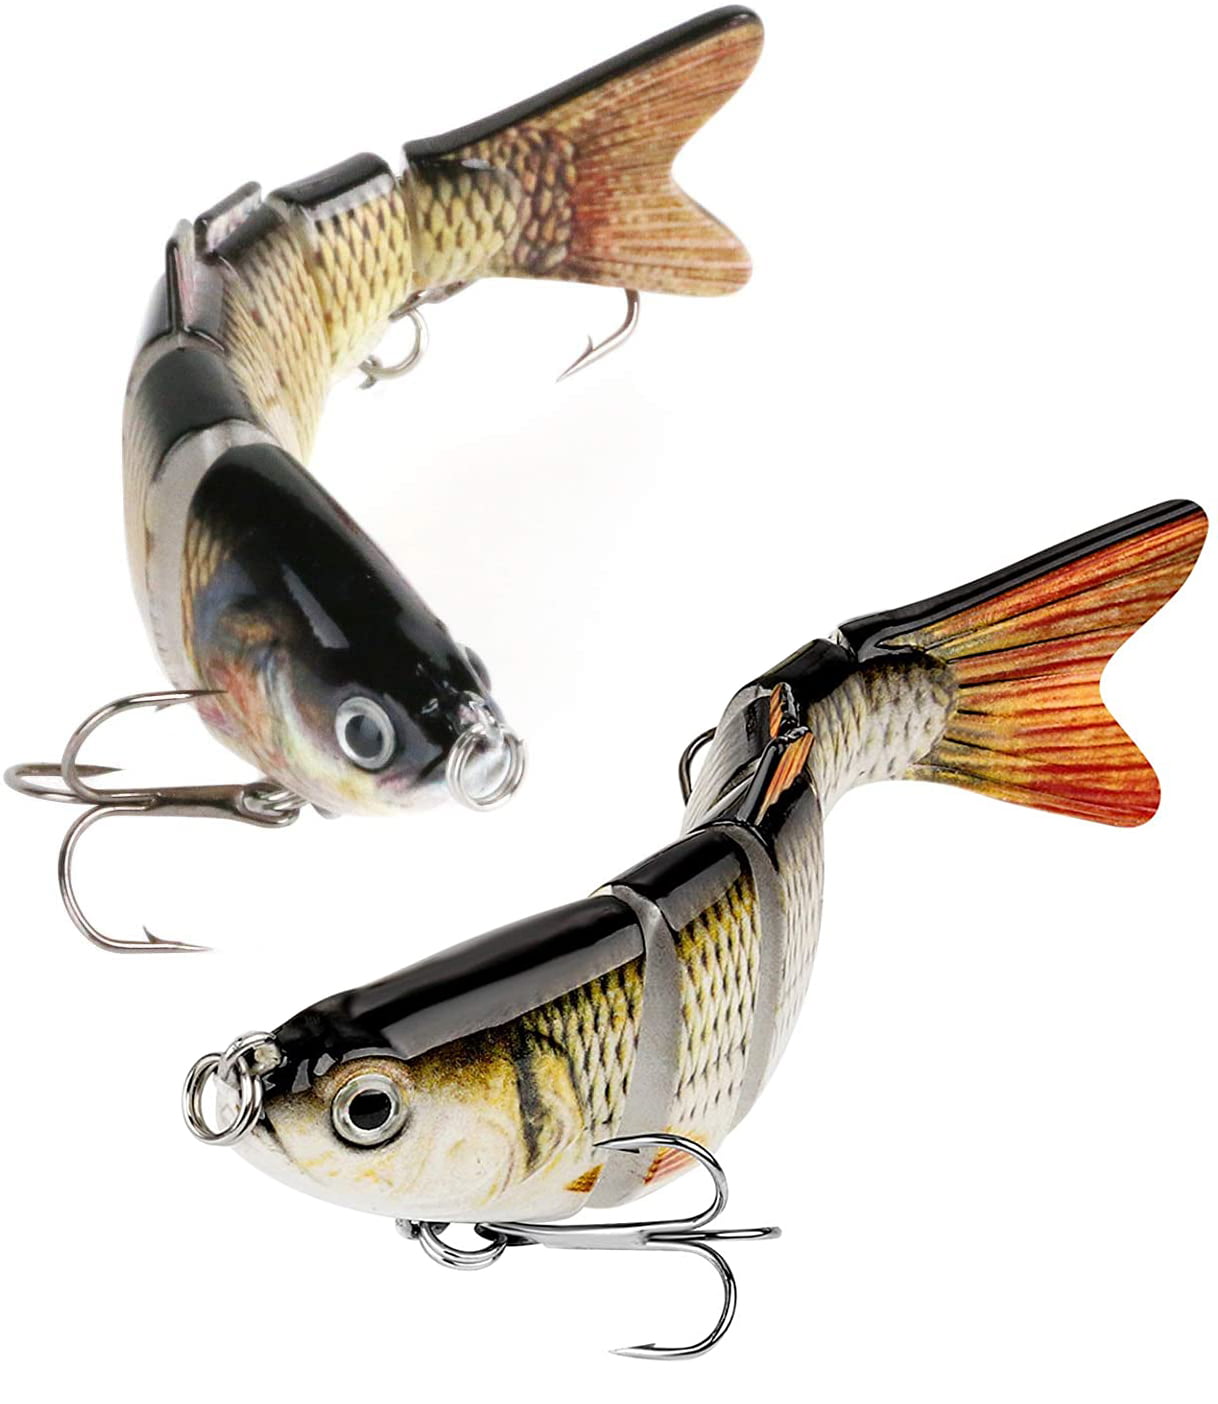 Fishing Lures Jointed Crankbaits Bass Minnow Fish Trout tackle 6Segment Swimbait 